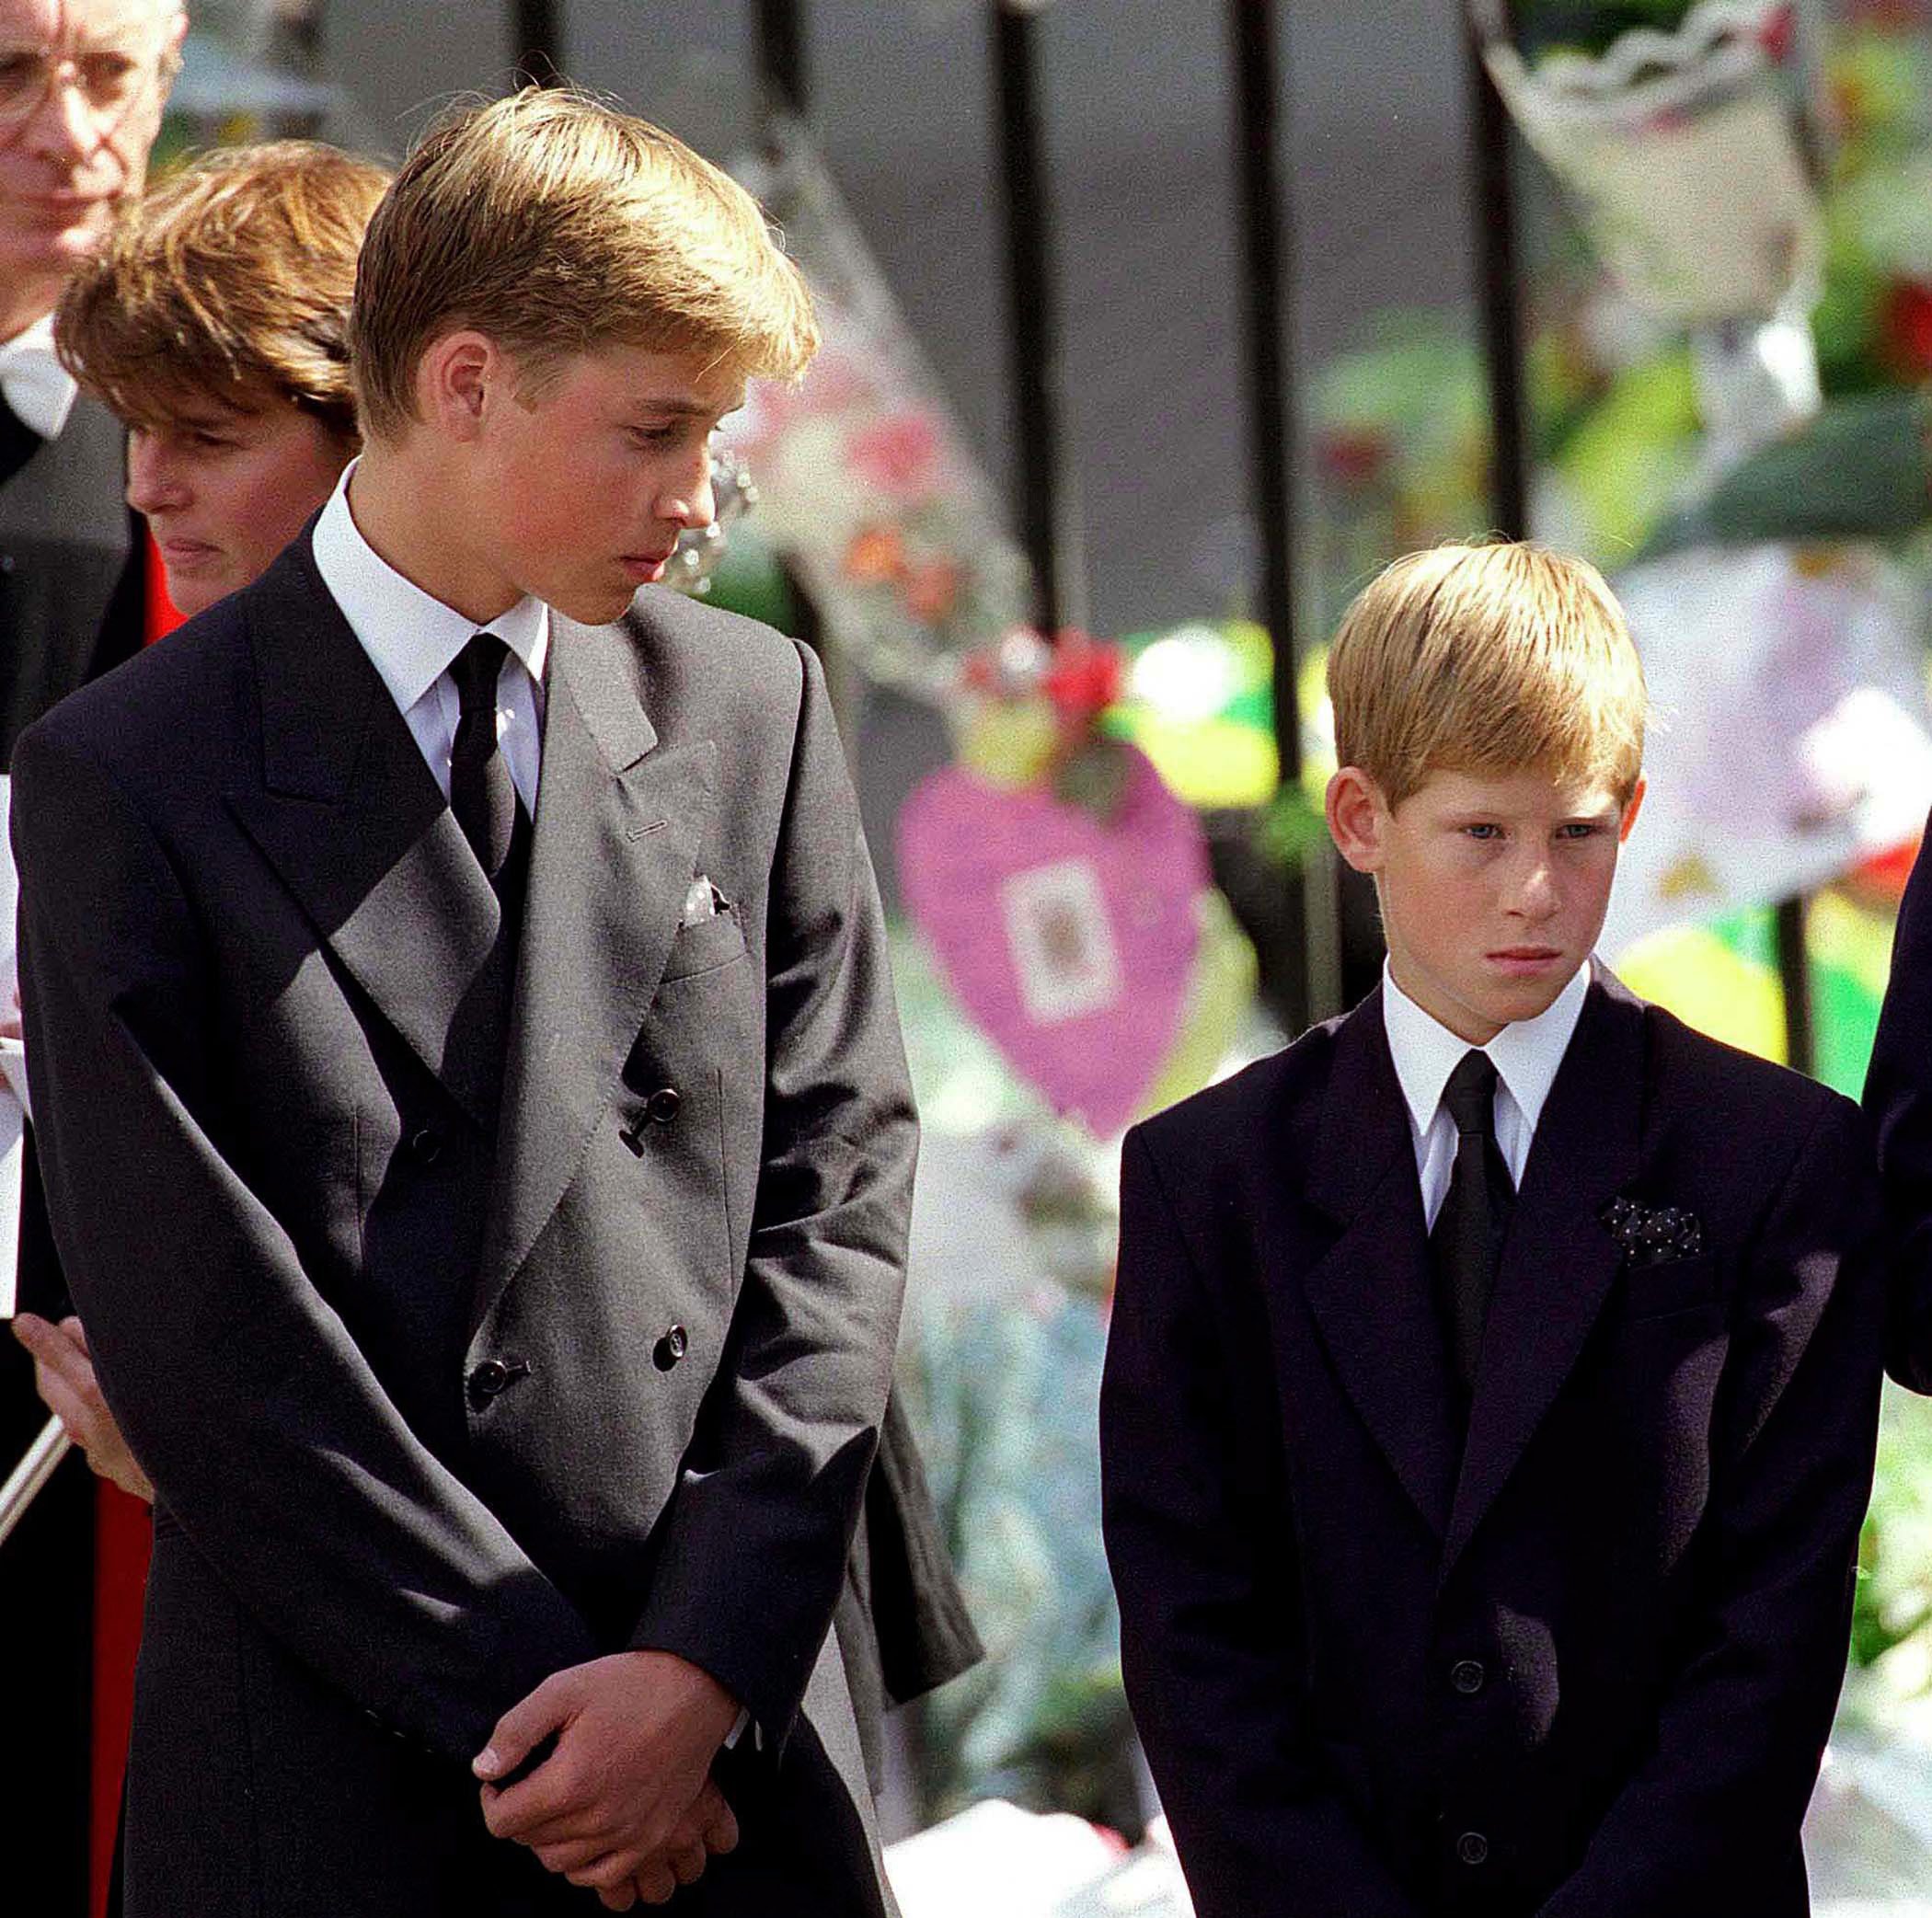 Prince William and Prince Harry stand outside Westminster Abbey at the funeral of Diana, Princess of Wales on September 6, 1997 in London, England | Source: Getty Images